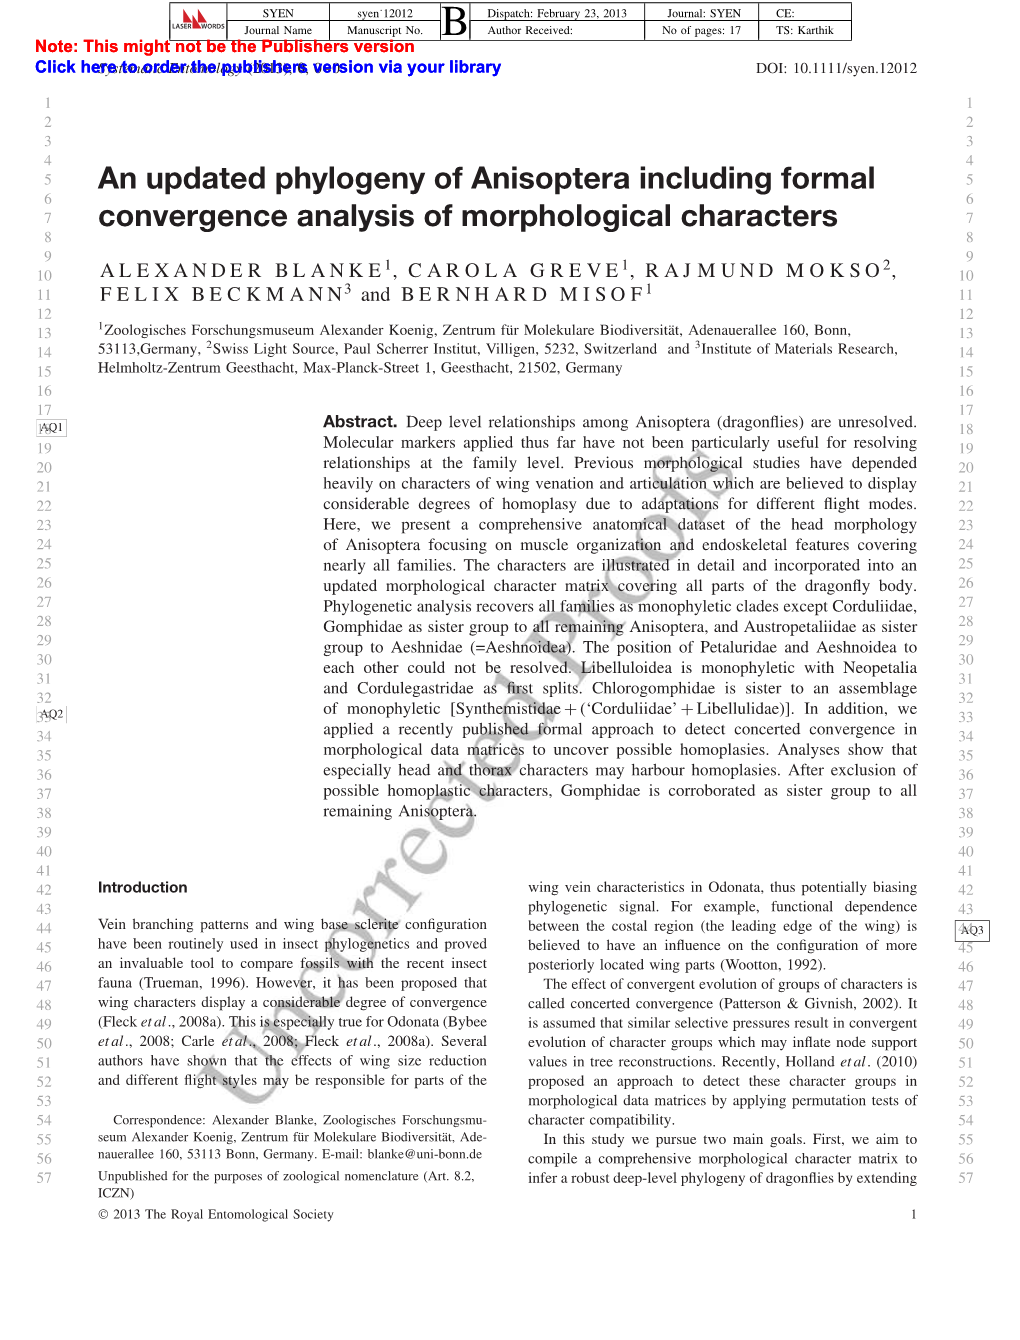 An Updated Phylogeny of Anisoptera Including Formal Convergence